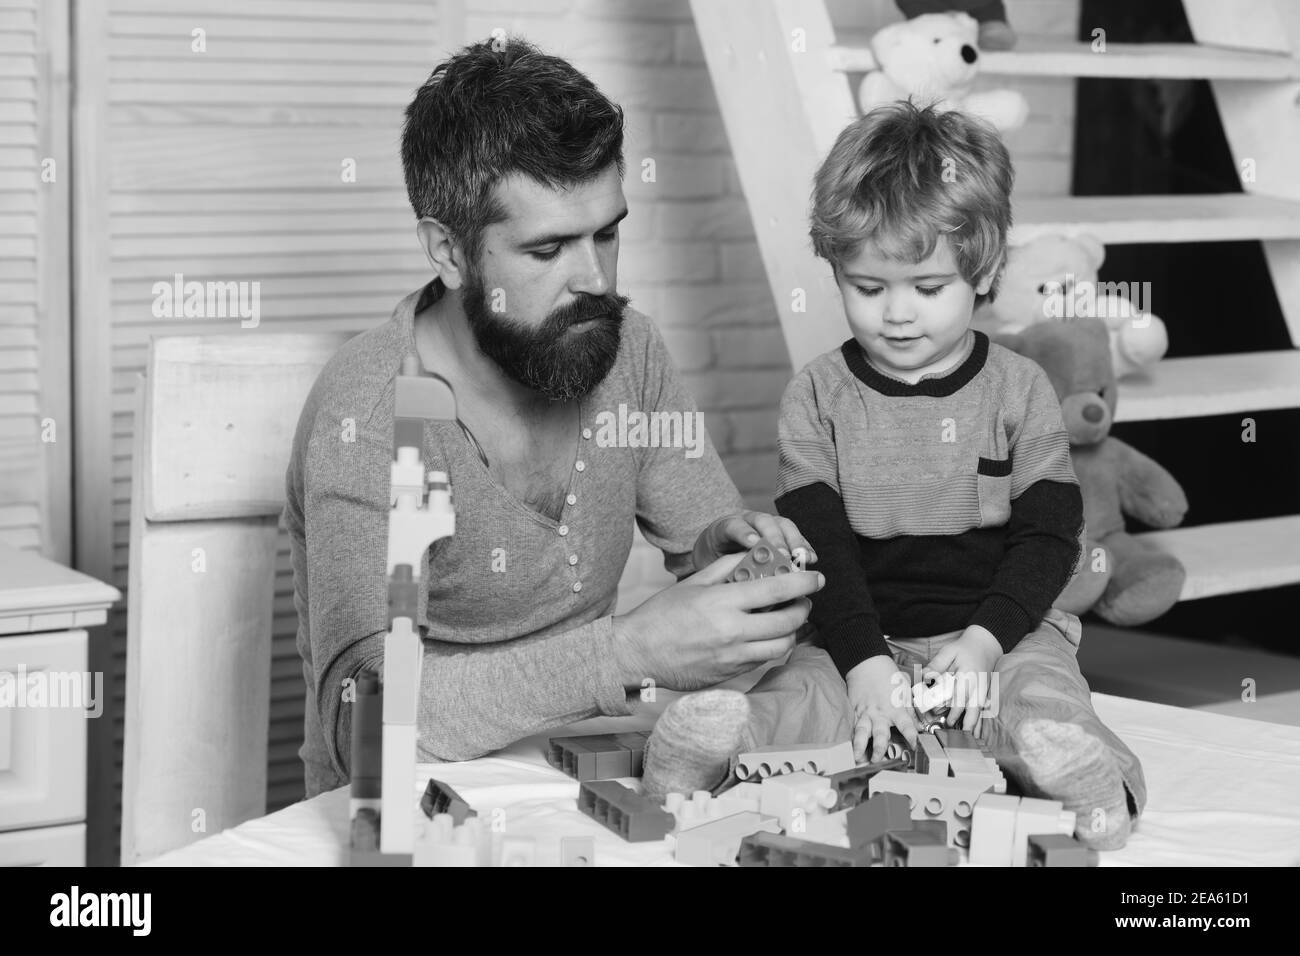 Boy and bearded man play together. Father and son with serious faces create colorful toy out of bricks. Dad and kid with toys on wooden background build of plastic blocks. Family and childhood concept Stock Photo